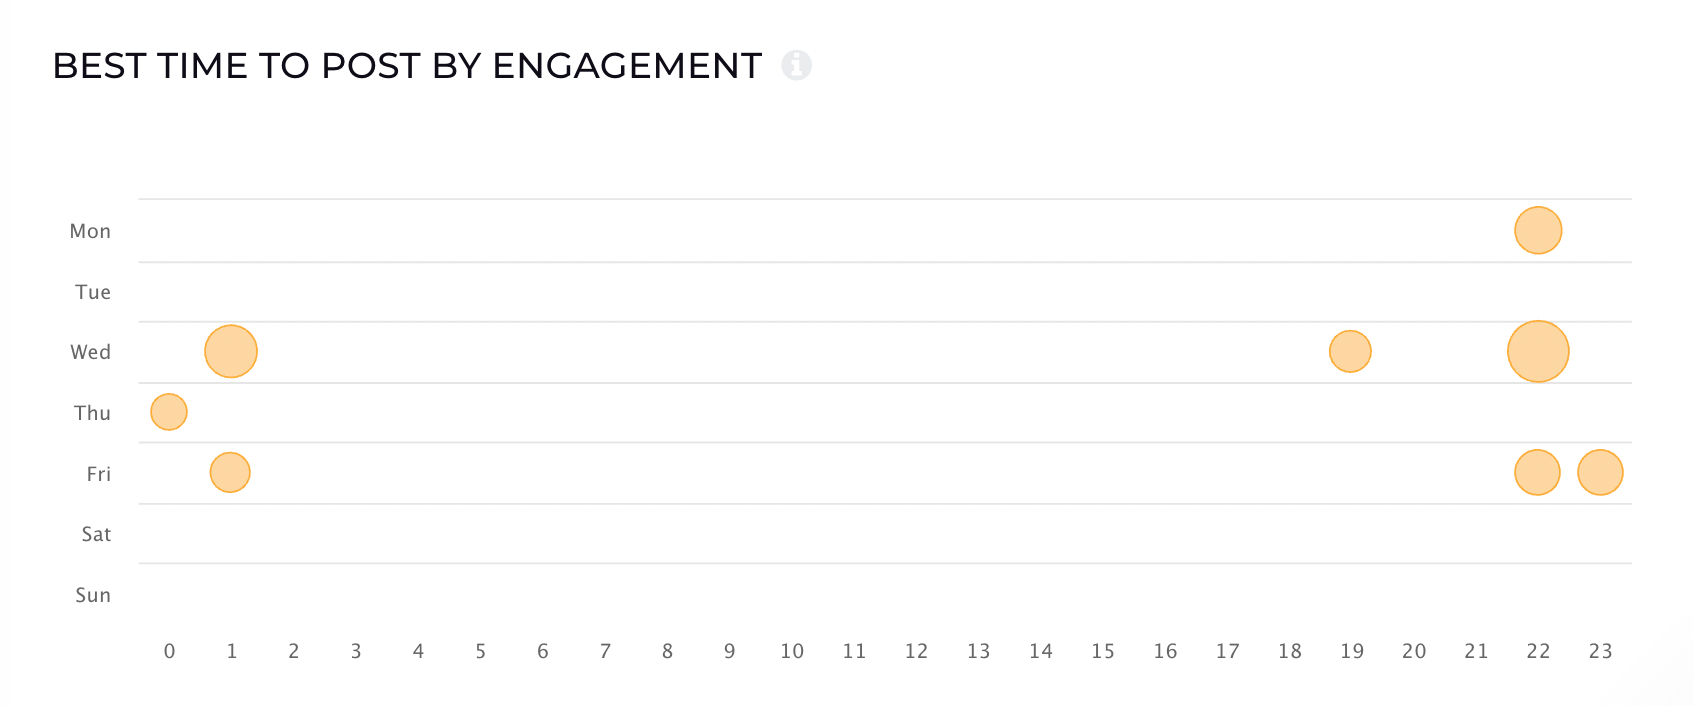 In order to increase Facebook engagement you must look at the optimal posting time.